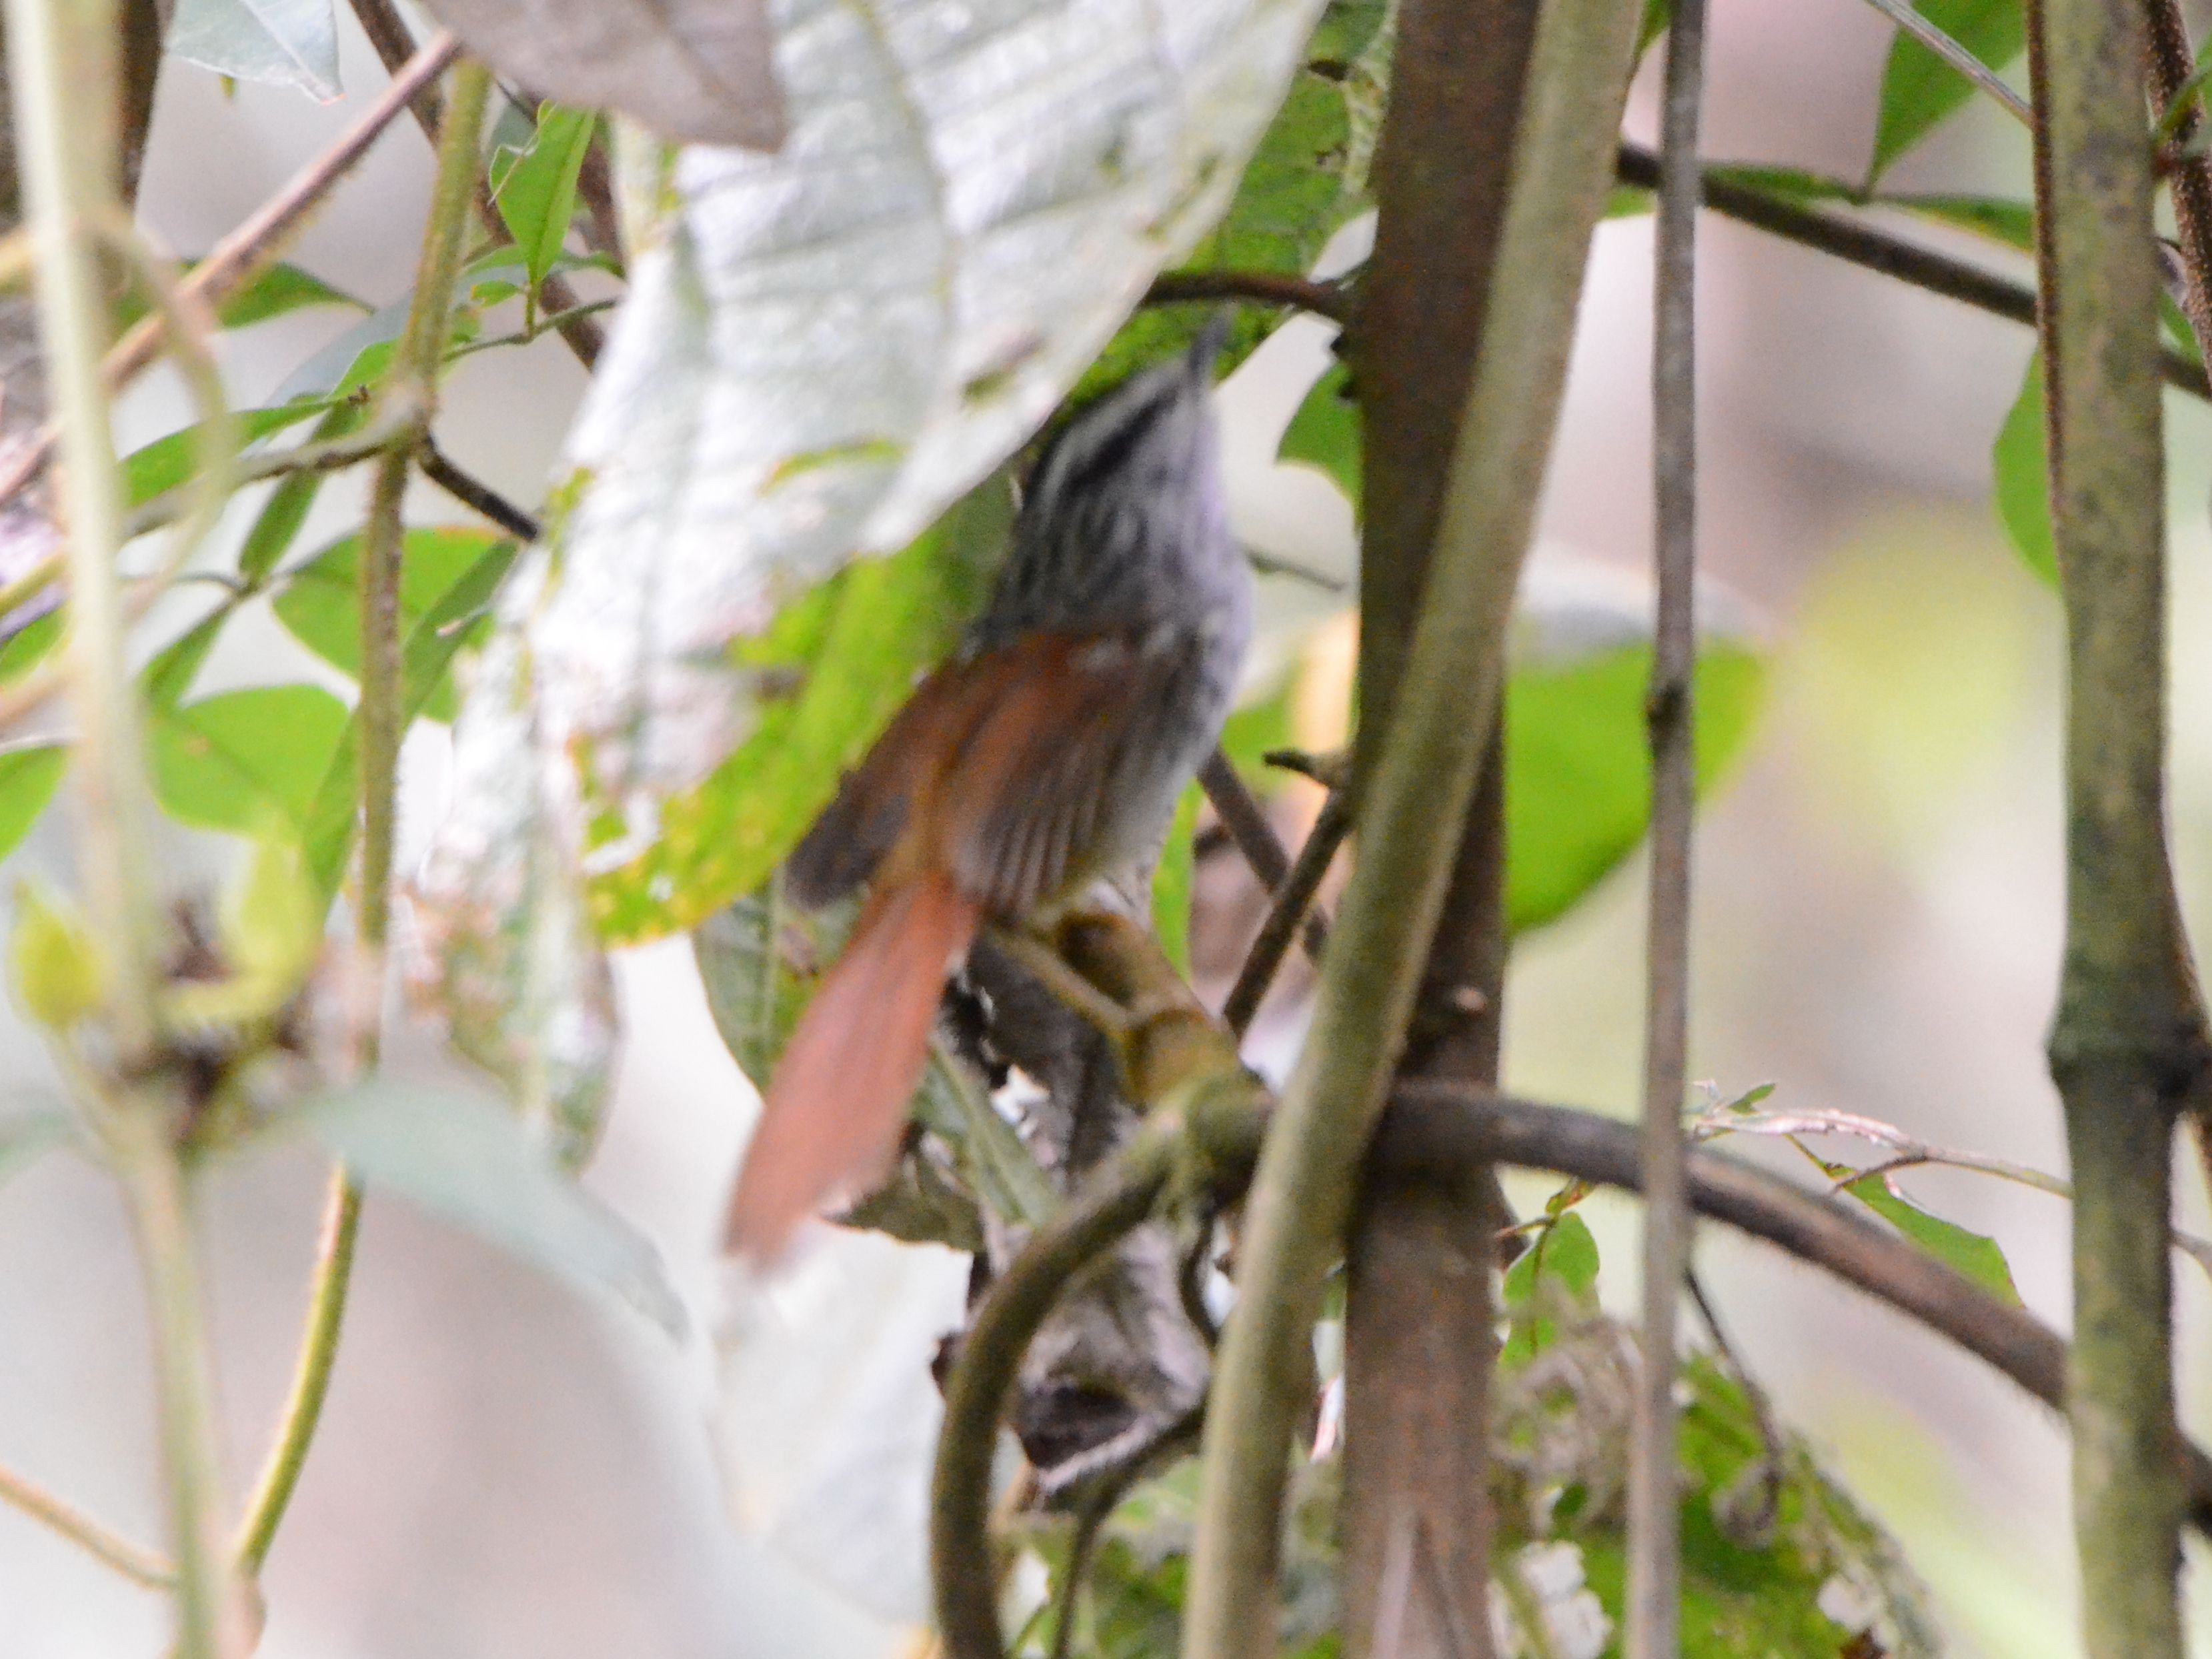 Click picture to see more Rufous-tailed Antbirds.